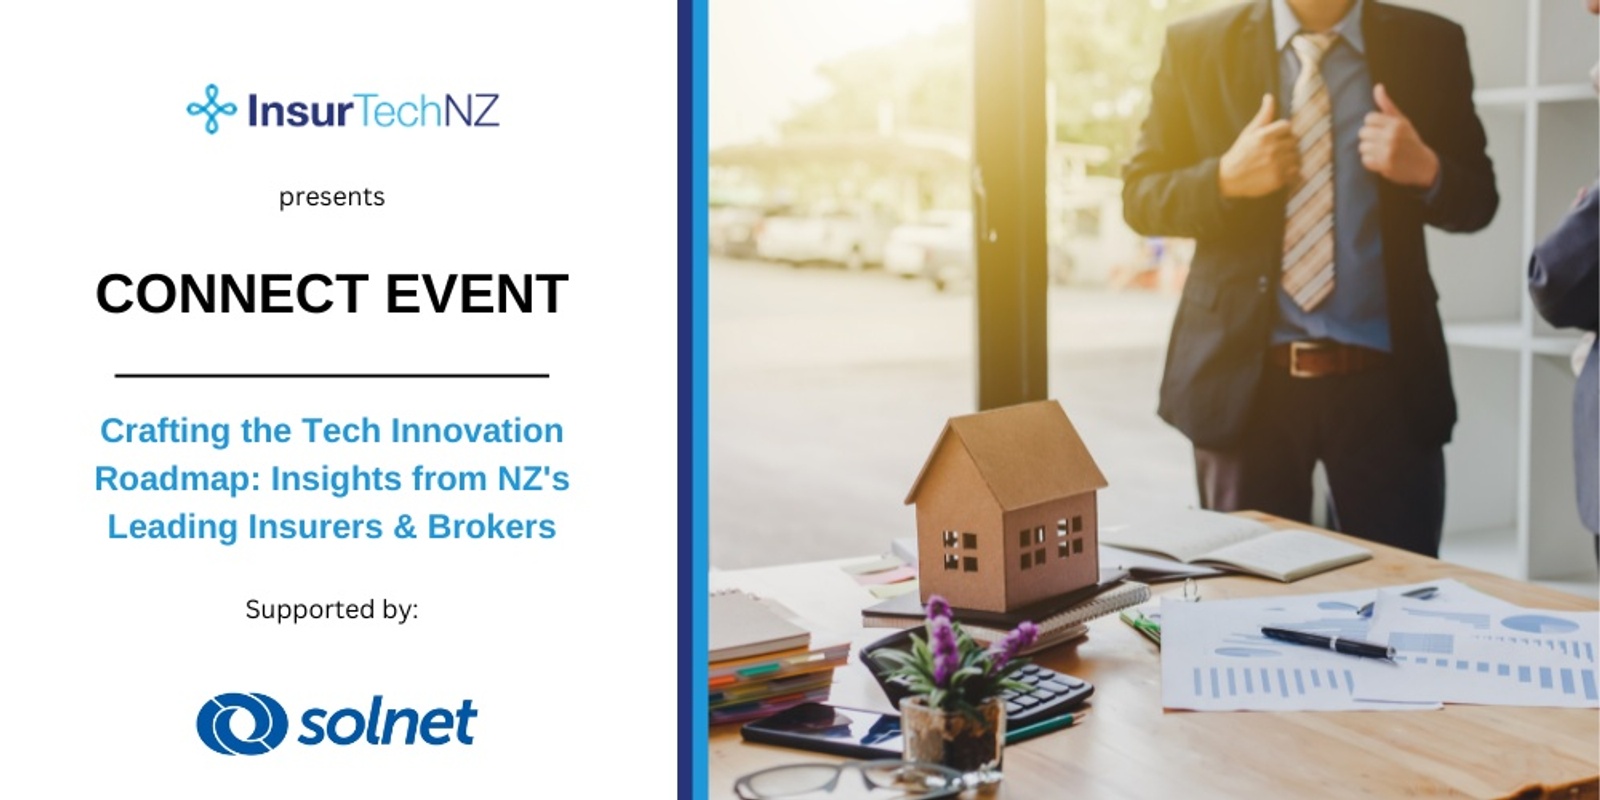 Banner image for InsurTechNZ: Crafting the Tech Innovation Roadmap: Insights from NZ's Leading Insurers & Brokers